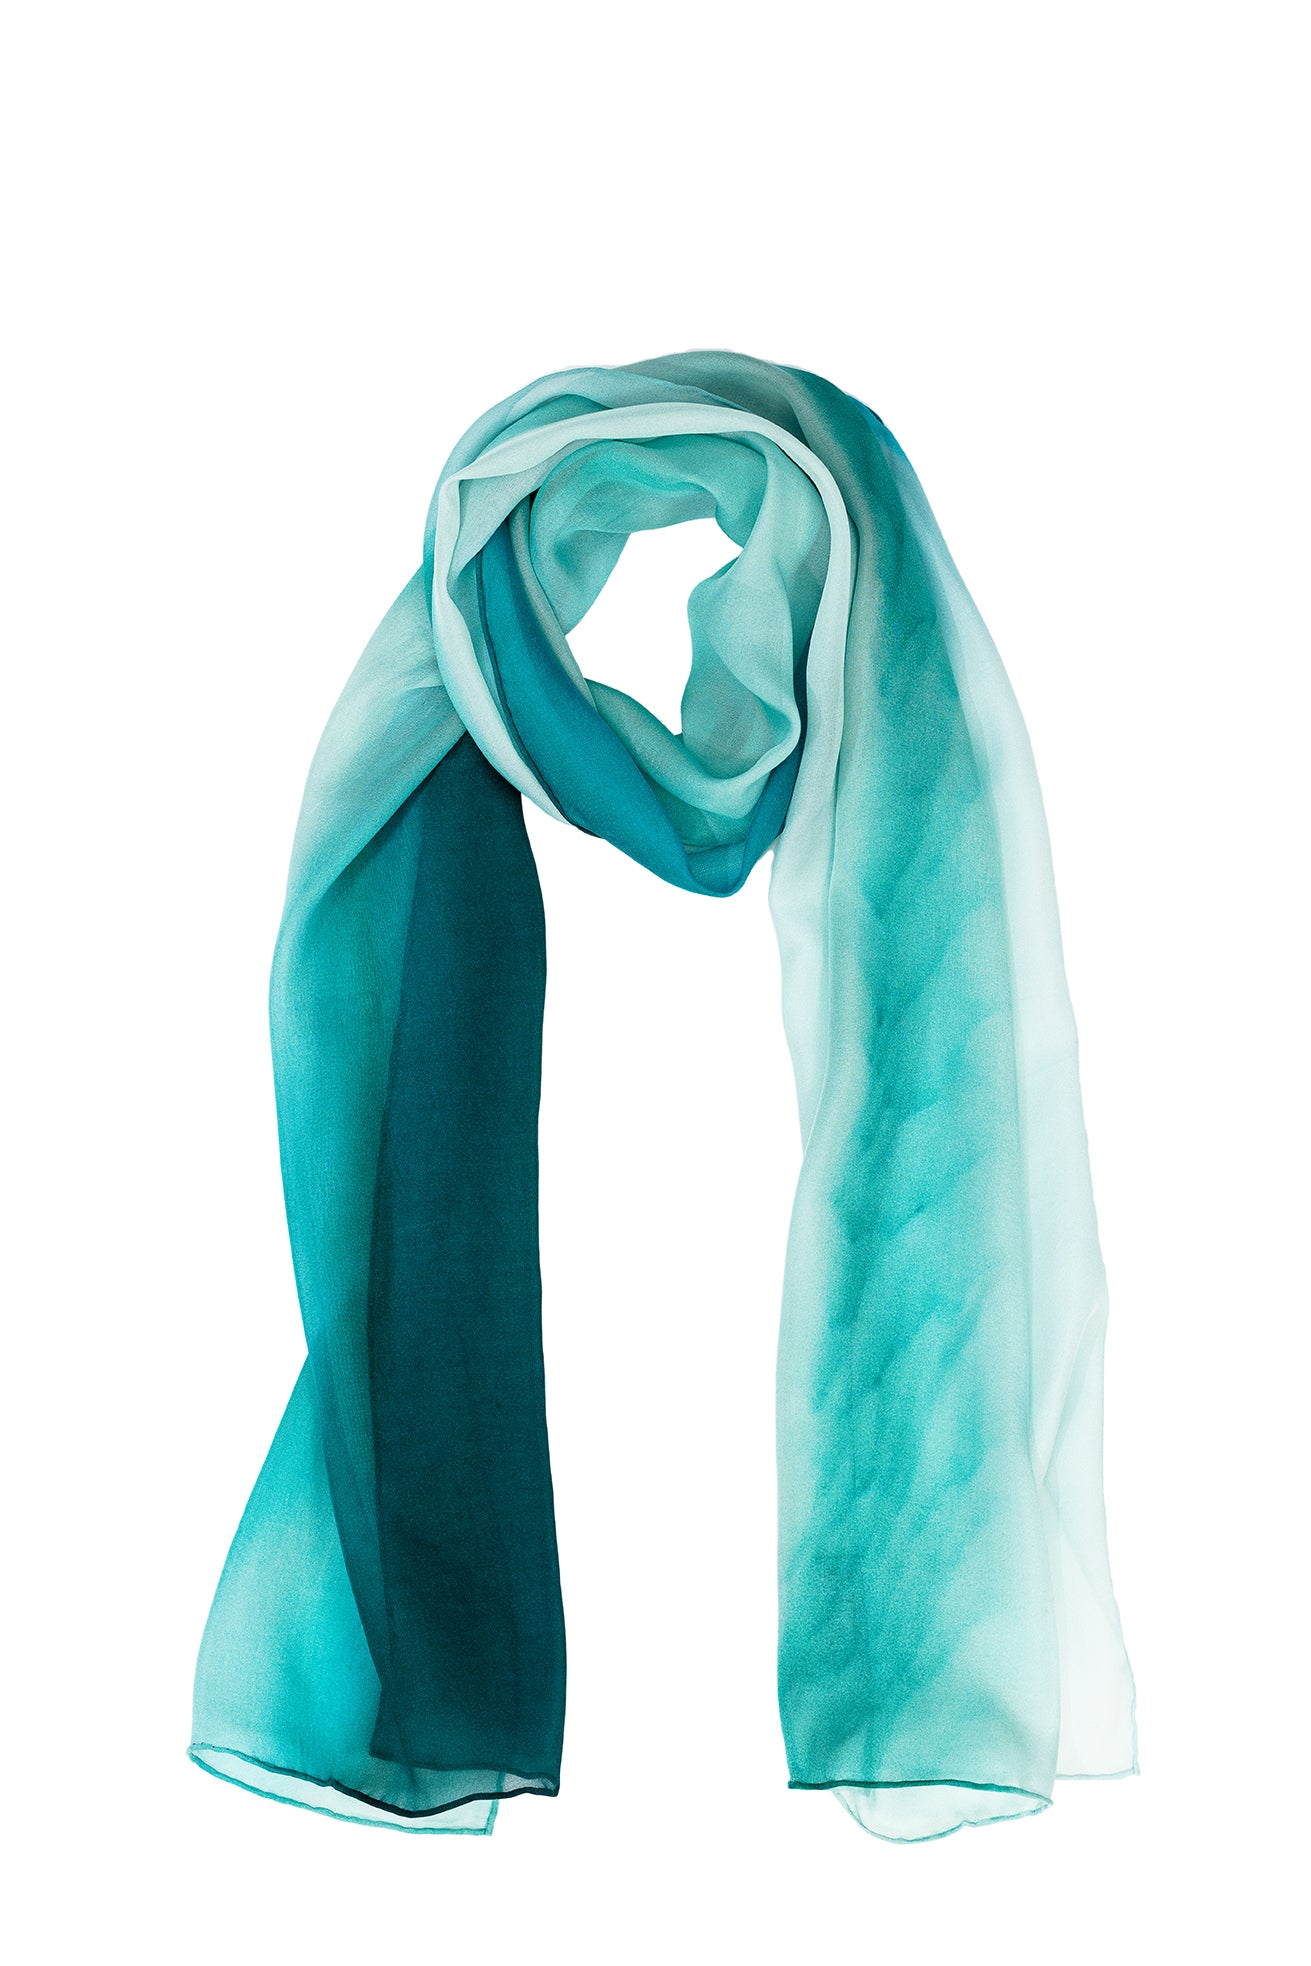 Silk Scarf Comet print a small boat in the distance replicates a comet amongst the sand and blue green water swirling together